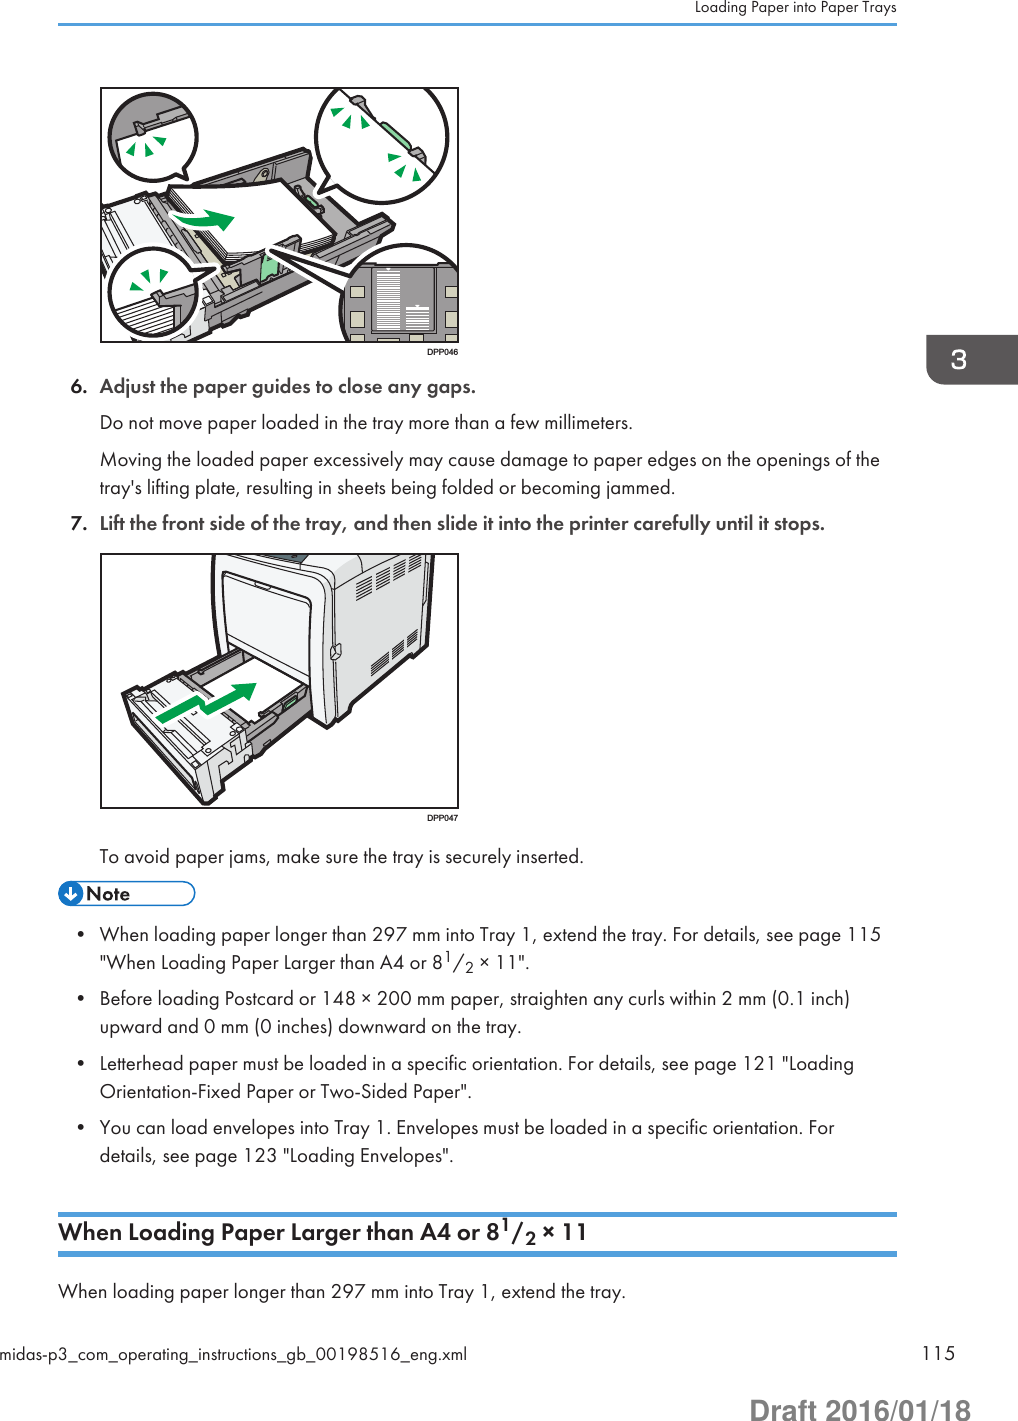 DPP0466. Adjust the paper guides to close any gaps.Do not move paper loaded in the tray more than a few millimeters.Moving the loaded paper excessively may cause damage to paper edges on the openings of thetray&apos;s lifting plate, resulting in sheets being folded or becoming jammed.7. Lift the front side of the tray, and then slide it into the printer carefully until it stops.DPP047To avoid paper jams, make sure the tray is securely inserted.• When loading paper longer than 297 mm into Tray 1, extend the tray. For details, see page 115&quot;When Loading Paper Larger than A4 or 81/2 × 11&quot;.• Before loading Postcard or 148 × 200 mm paper, straighten any curls within 2 mm (0.1 inch)upward and 0 mm (0 inches) downward on the tray.• Letterhead paper must be loaded in a specific orientation. For details, see page 121 &quot;LoadingOrientation-Fixed Paper or Two-Sided Paper&quot;.• You can load envelopes into Tray 1. Envelopes must be loaded in a specific orientation. Fordetails, see page 123 &quot;Loading Envelopes&quot;.When Loading Paper Larger than A4 or 81/2 × 11When loading paper longer than 297 mm into Tray 1, extend the tray.Loading Paper into Paper Traysmidas-p3_com_operating_instructions_gb_00198516_eng.xml 115Draft 2016/01/18